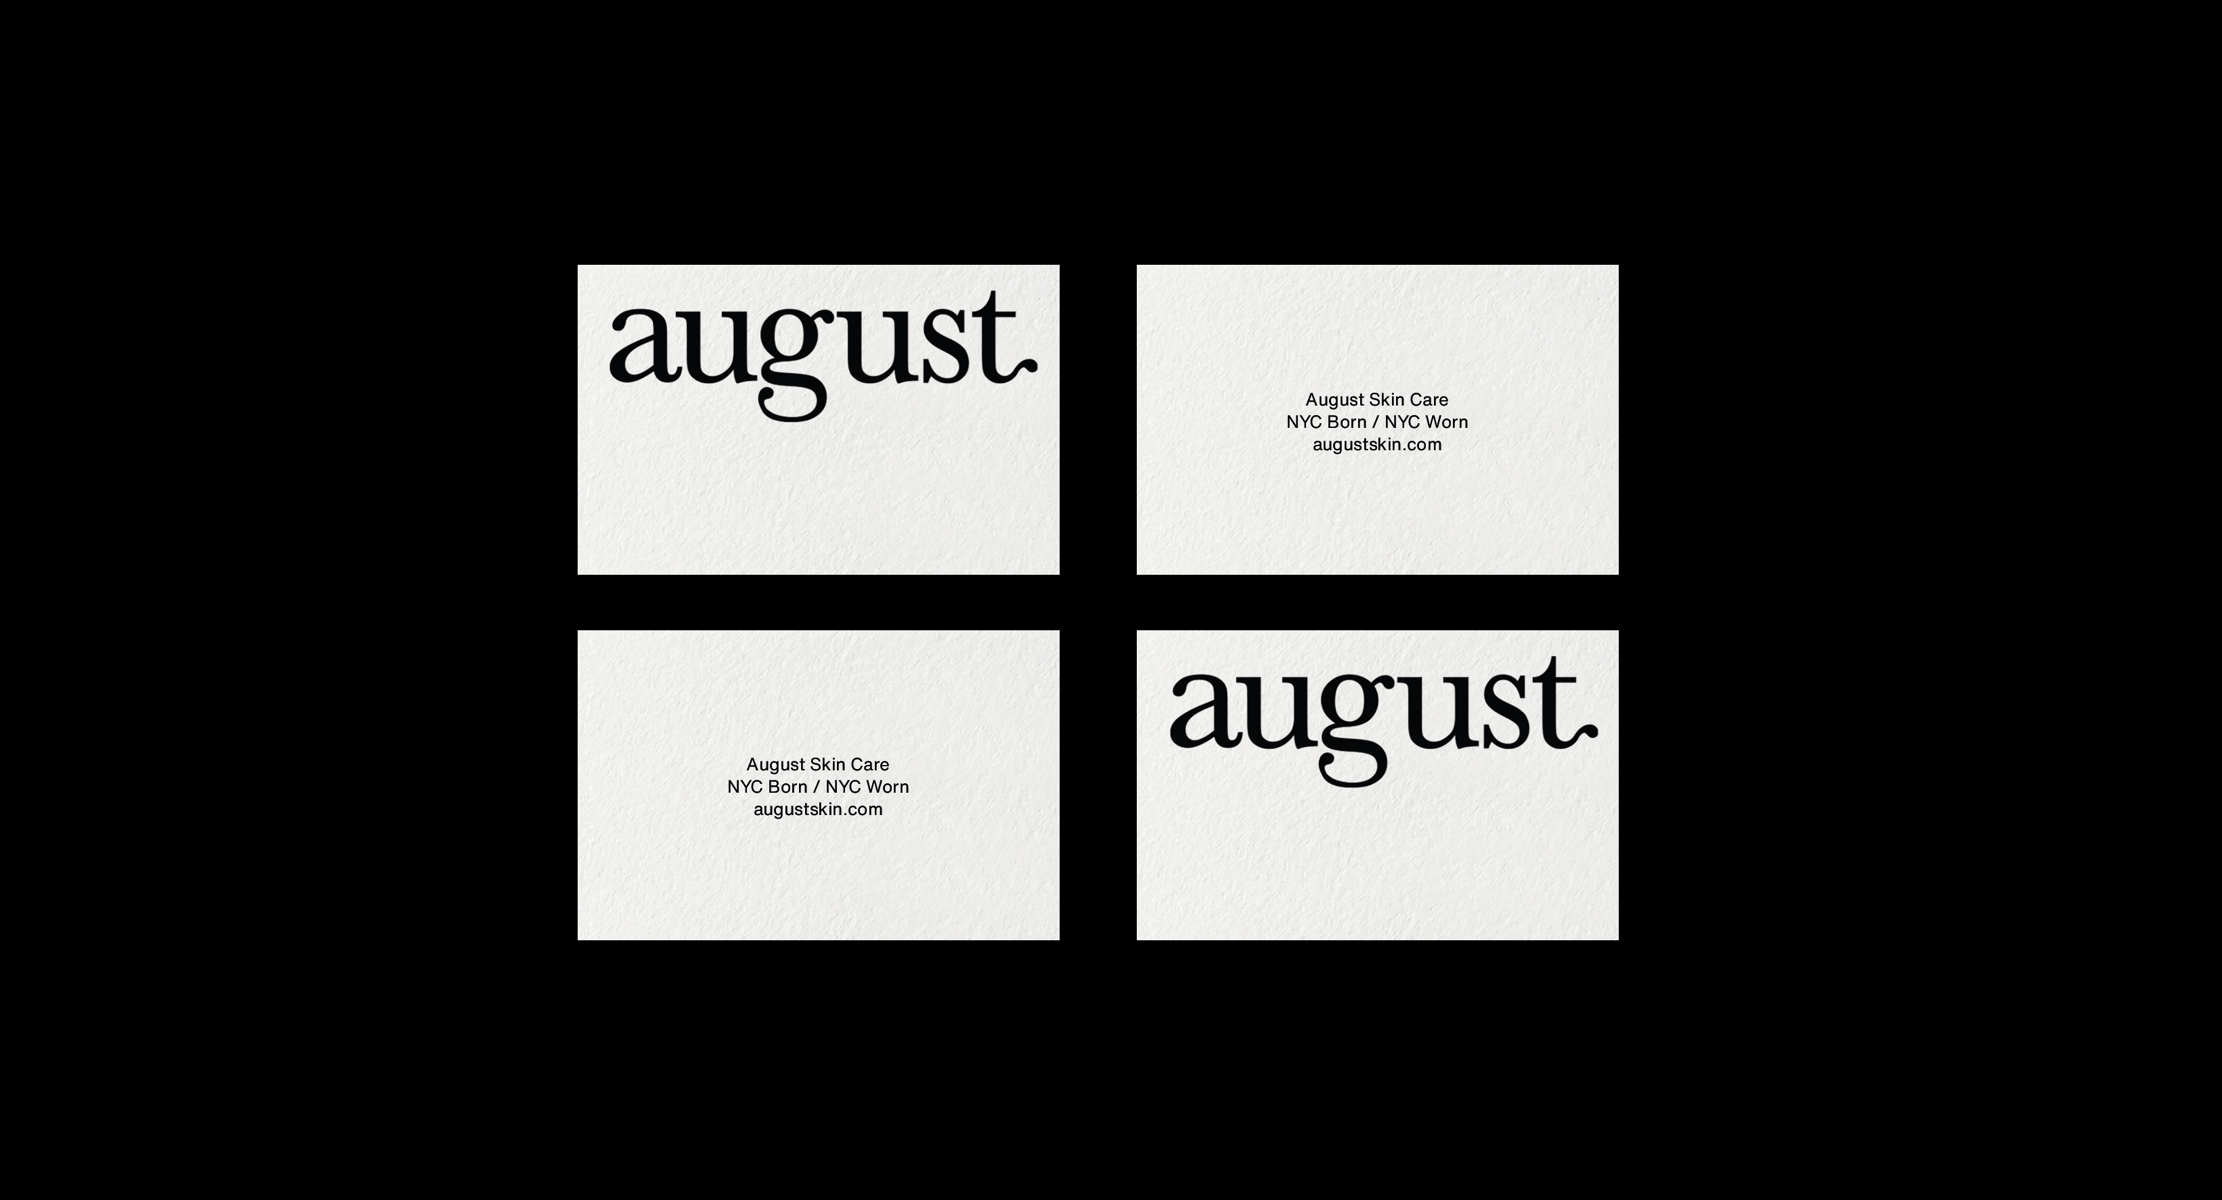 Branding and Visual Identity for August